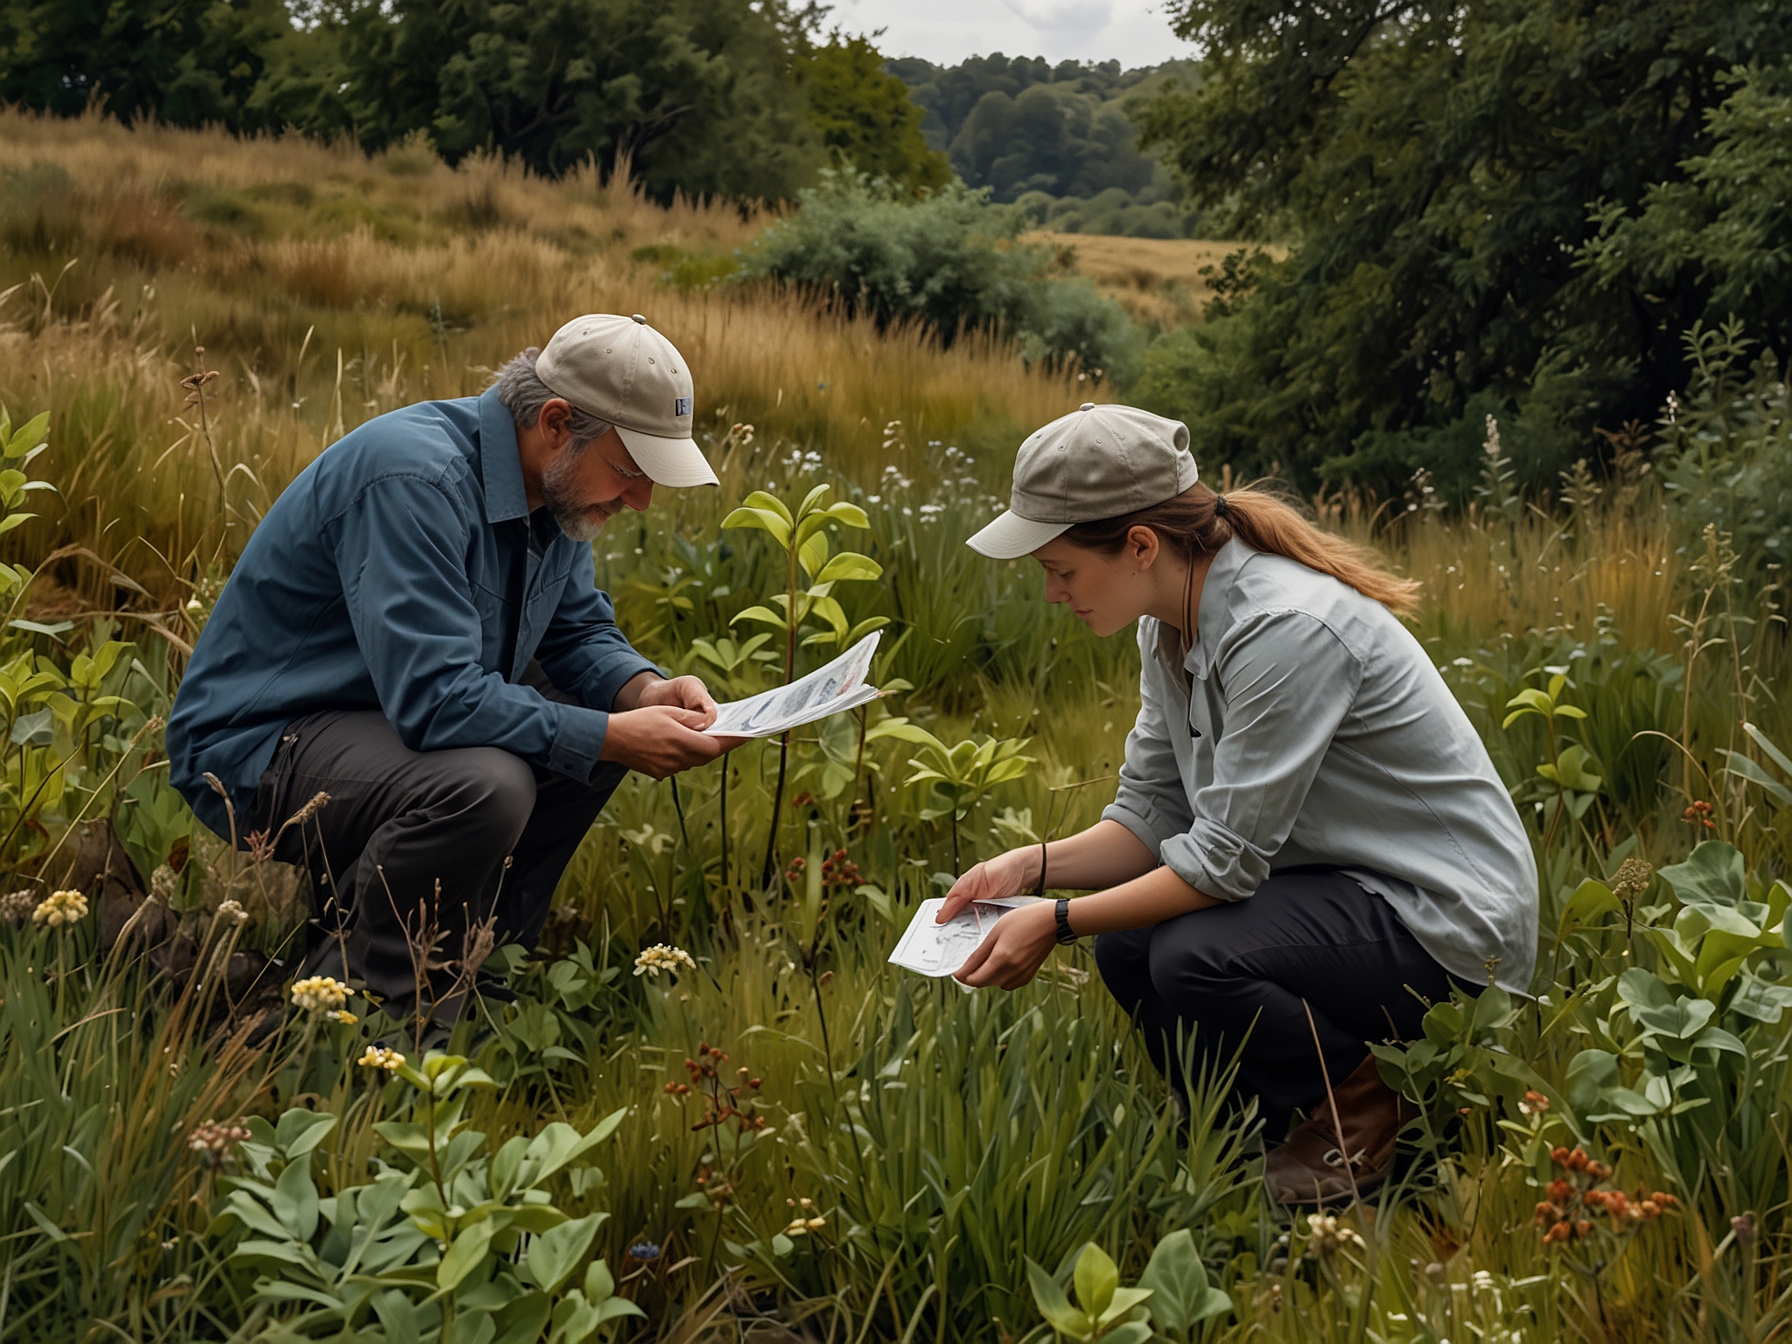 Ecologists examining the rare plant species discovered along the verges of Portland, highlighting the intrinsic biodiversity of the area and the urgent need for conservation.